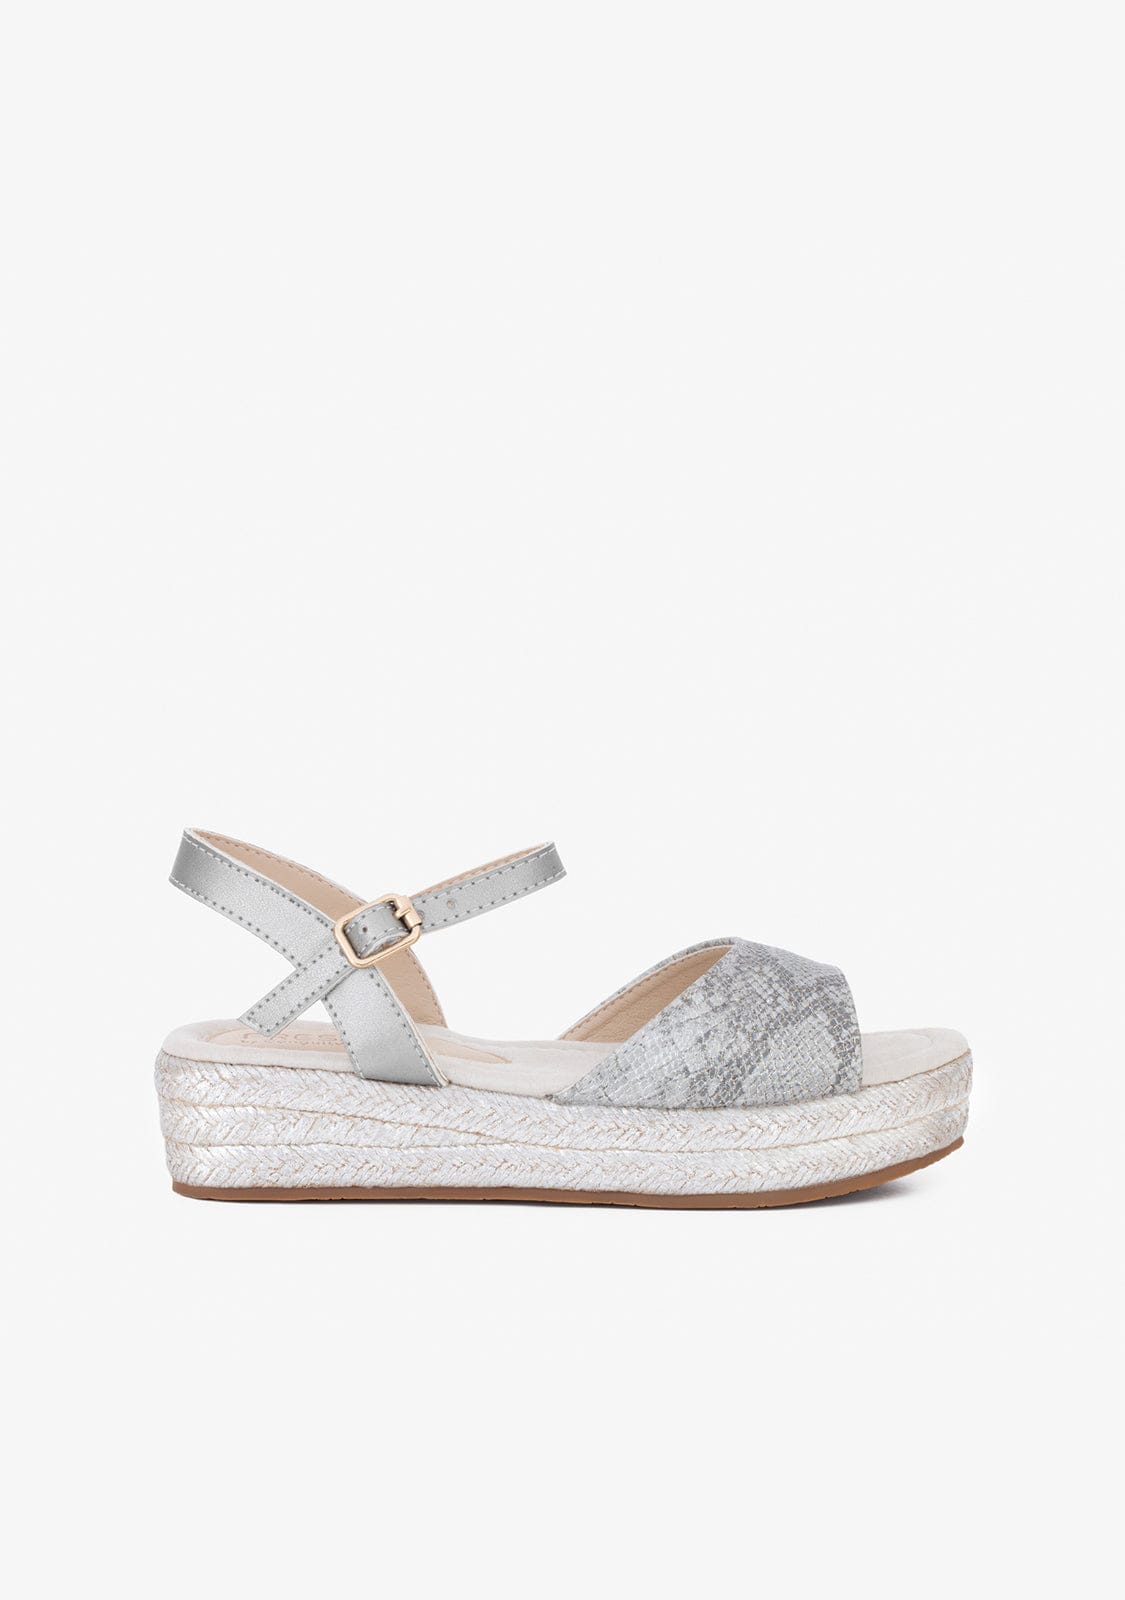 FRESAS CON NATA Shoes Girl's Silver Snake Wedge Sandals